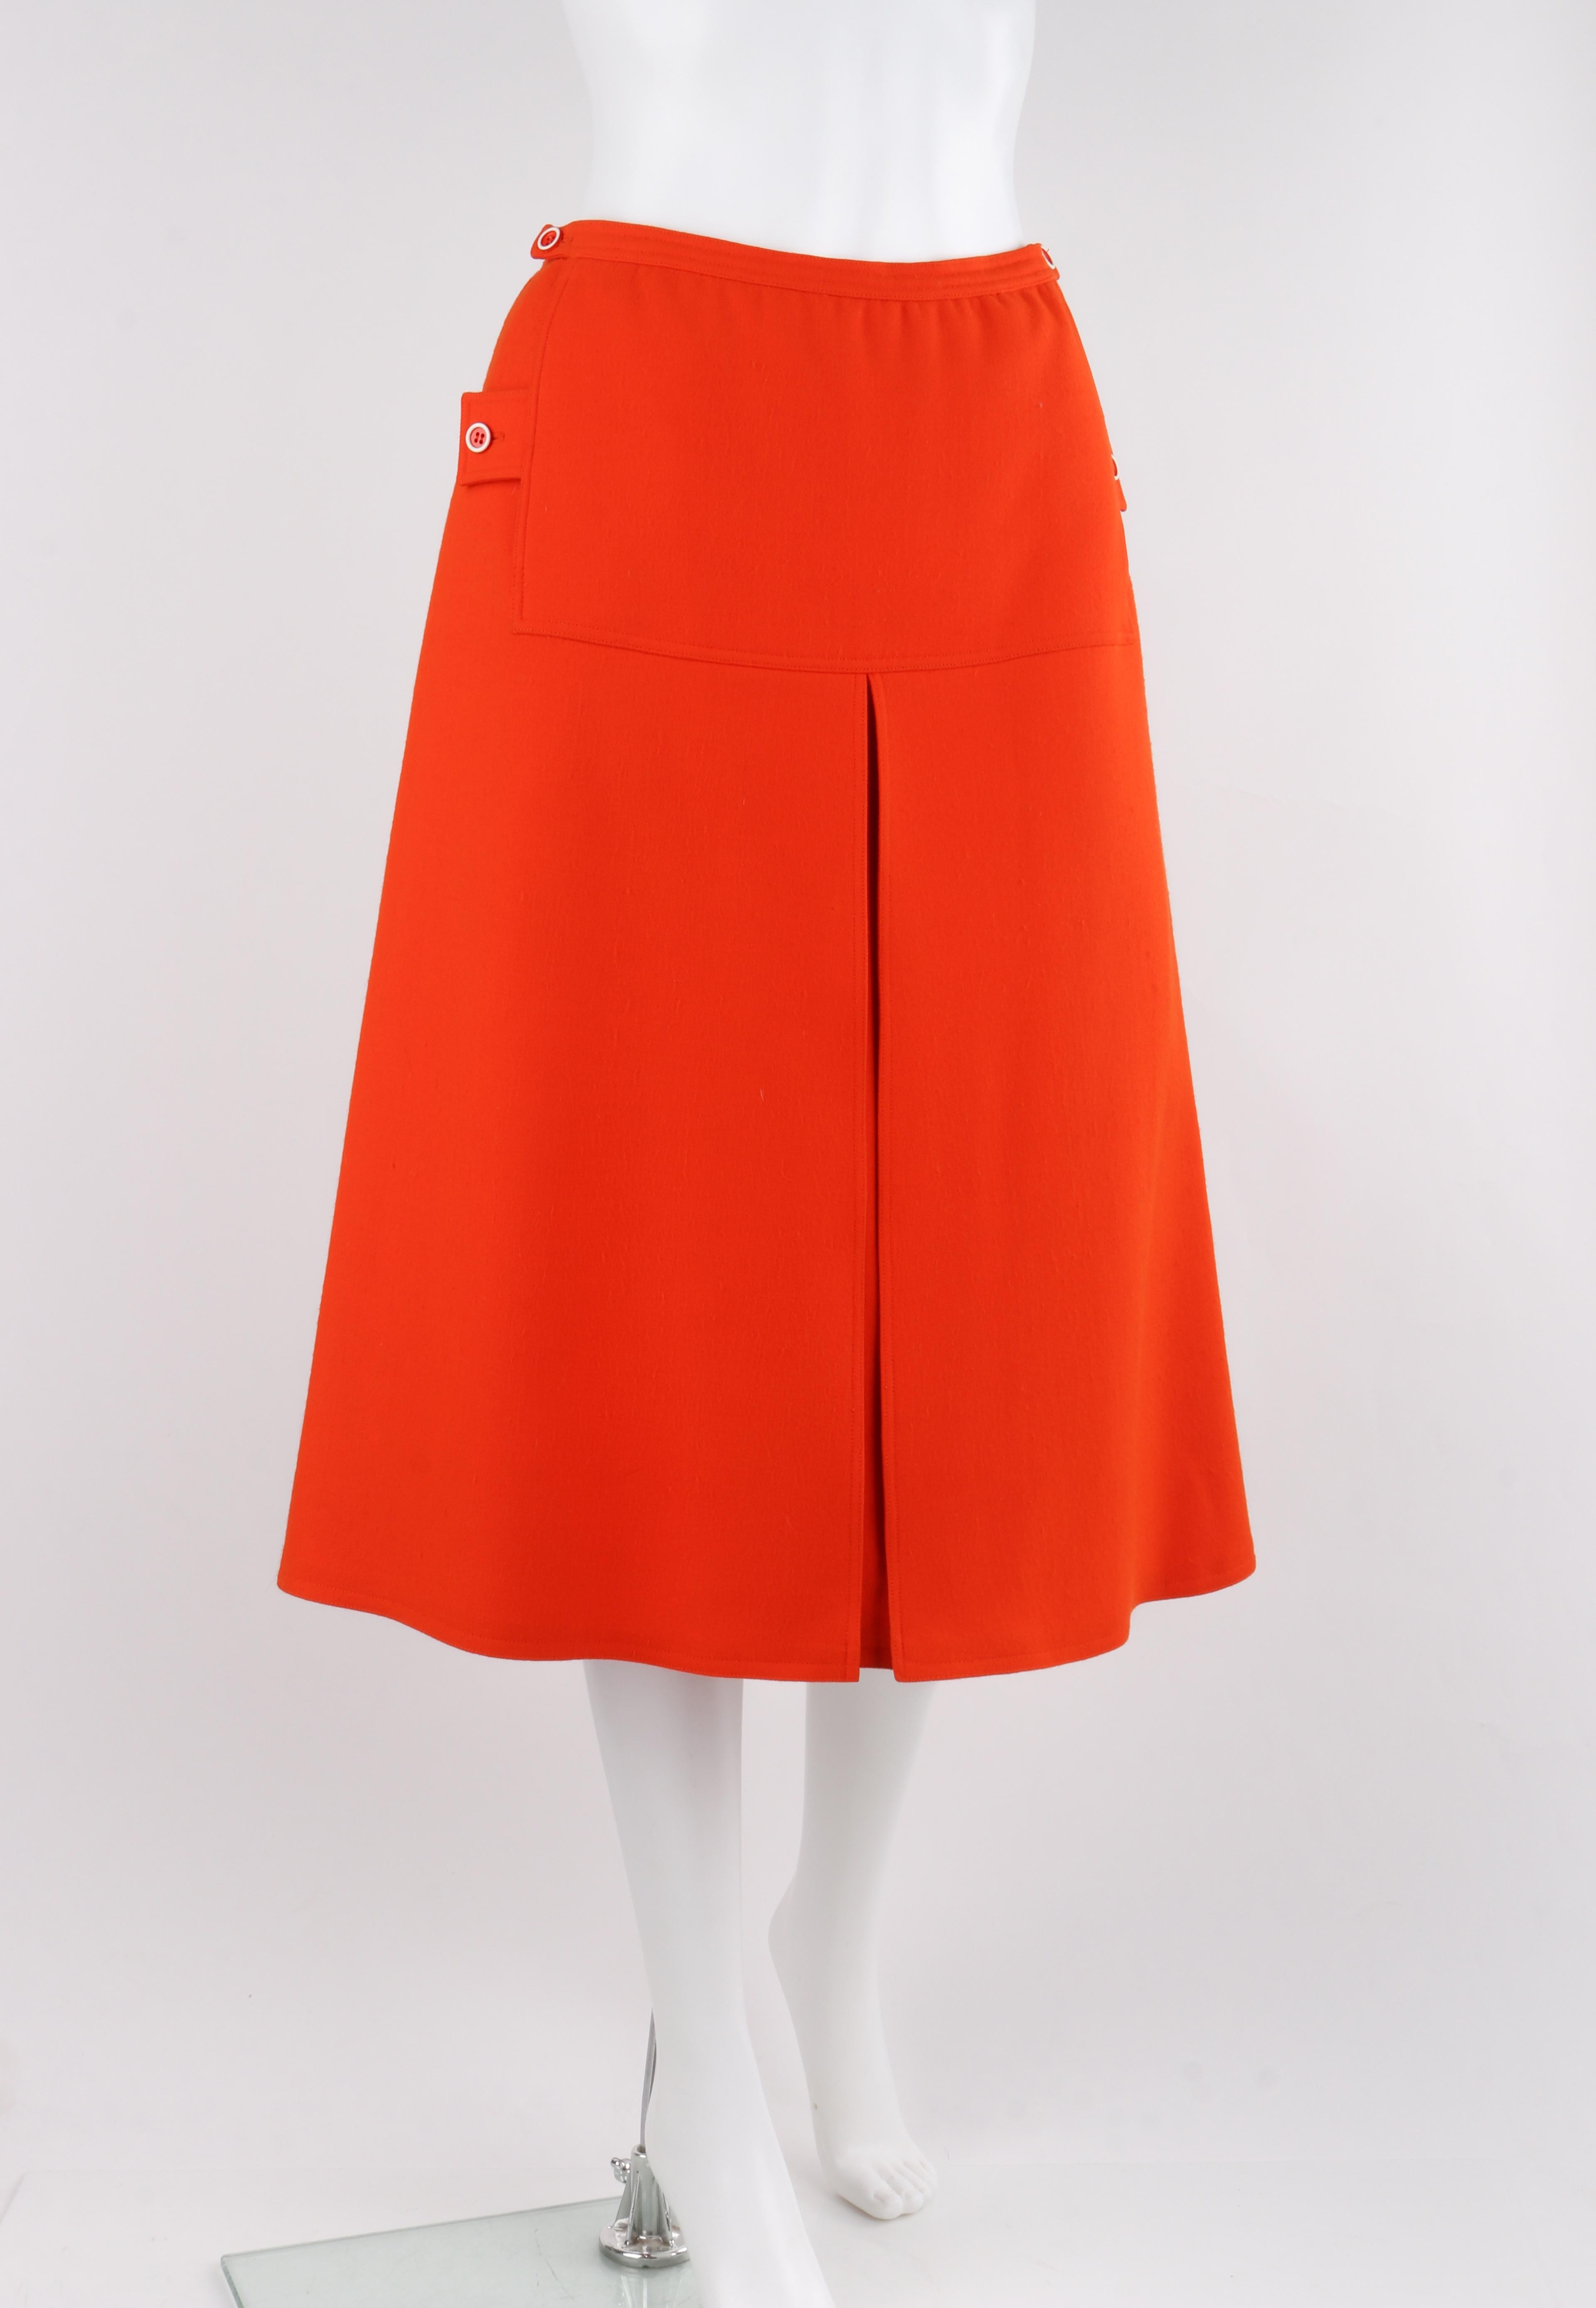 COURREGES c.1960's Vtg Orange Wool A Line Pleated Knee Length Button Skirt In Good Condition For Sale In Thiensville, WI